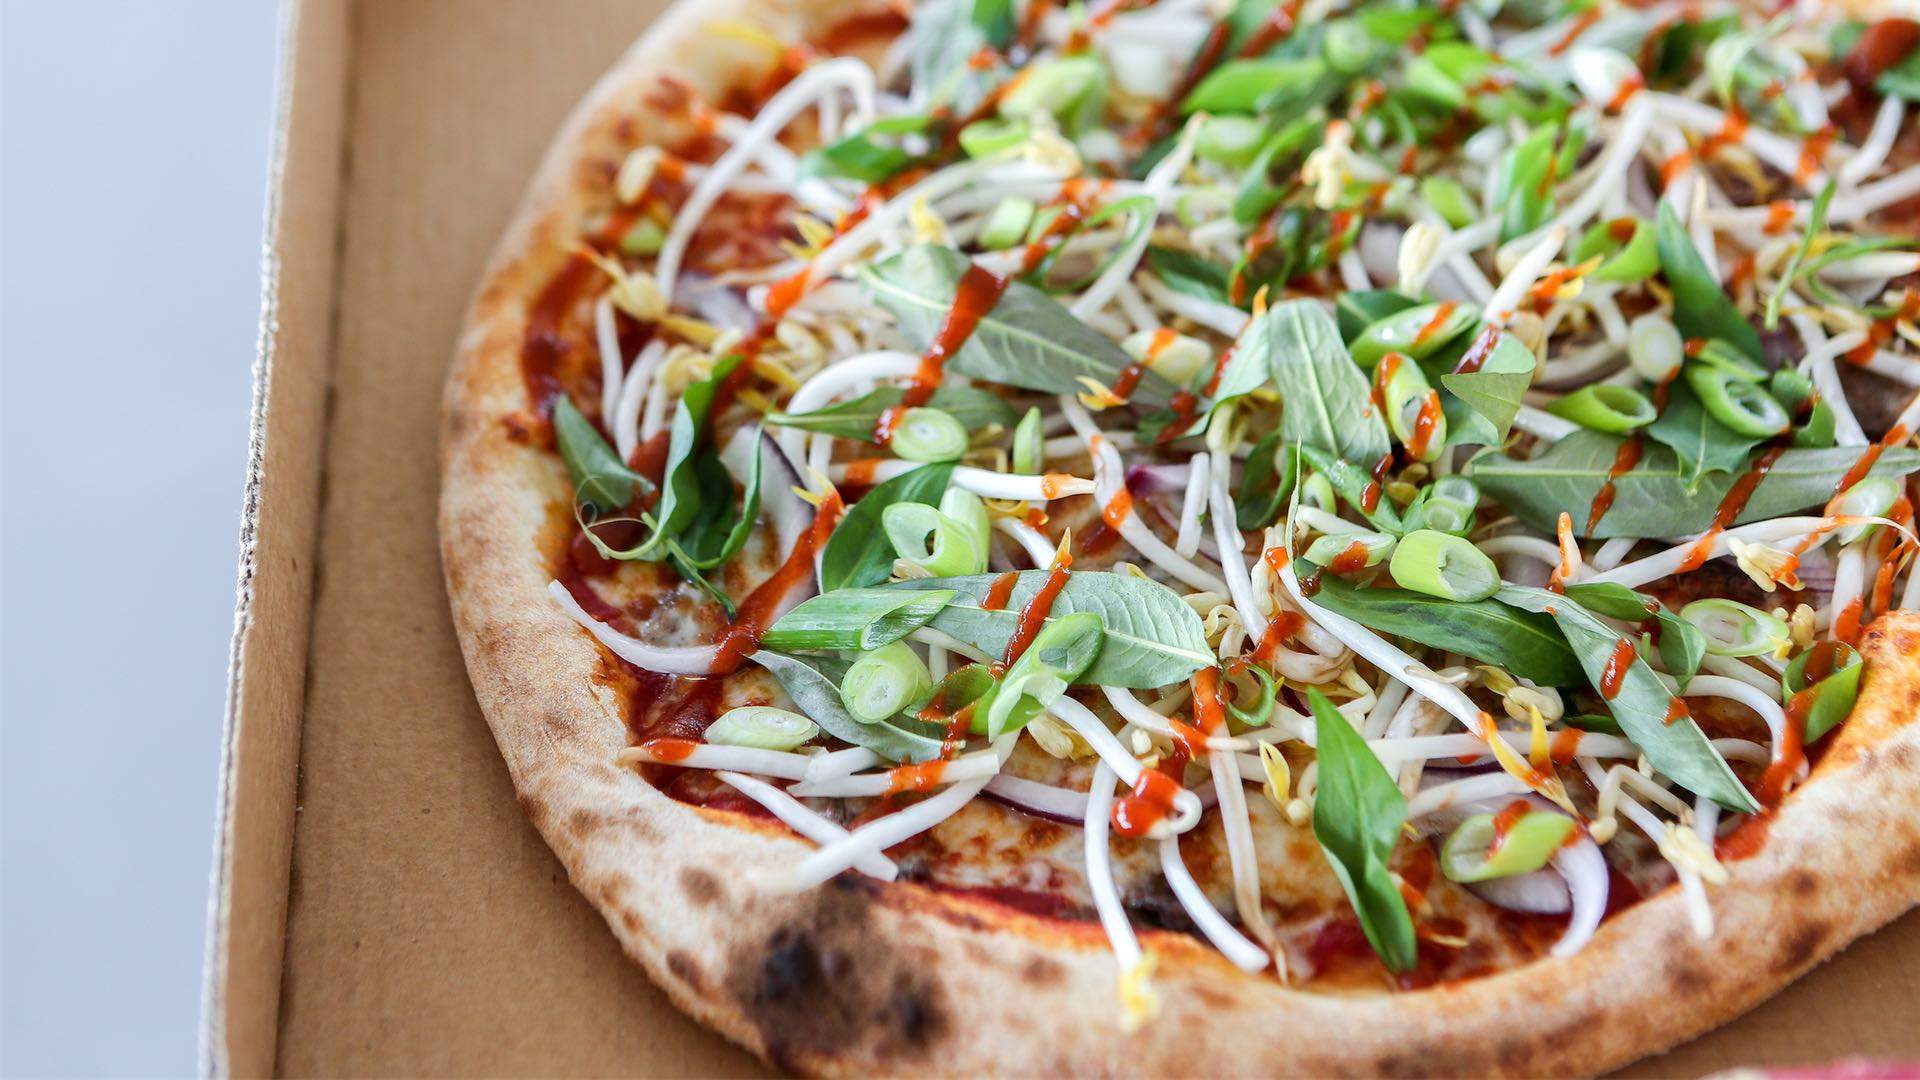 Coburg's Unconventional New Pizza Joint Is Launching with Free Pizza Today